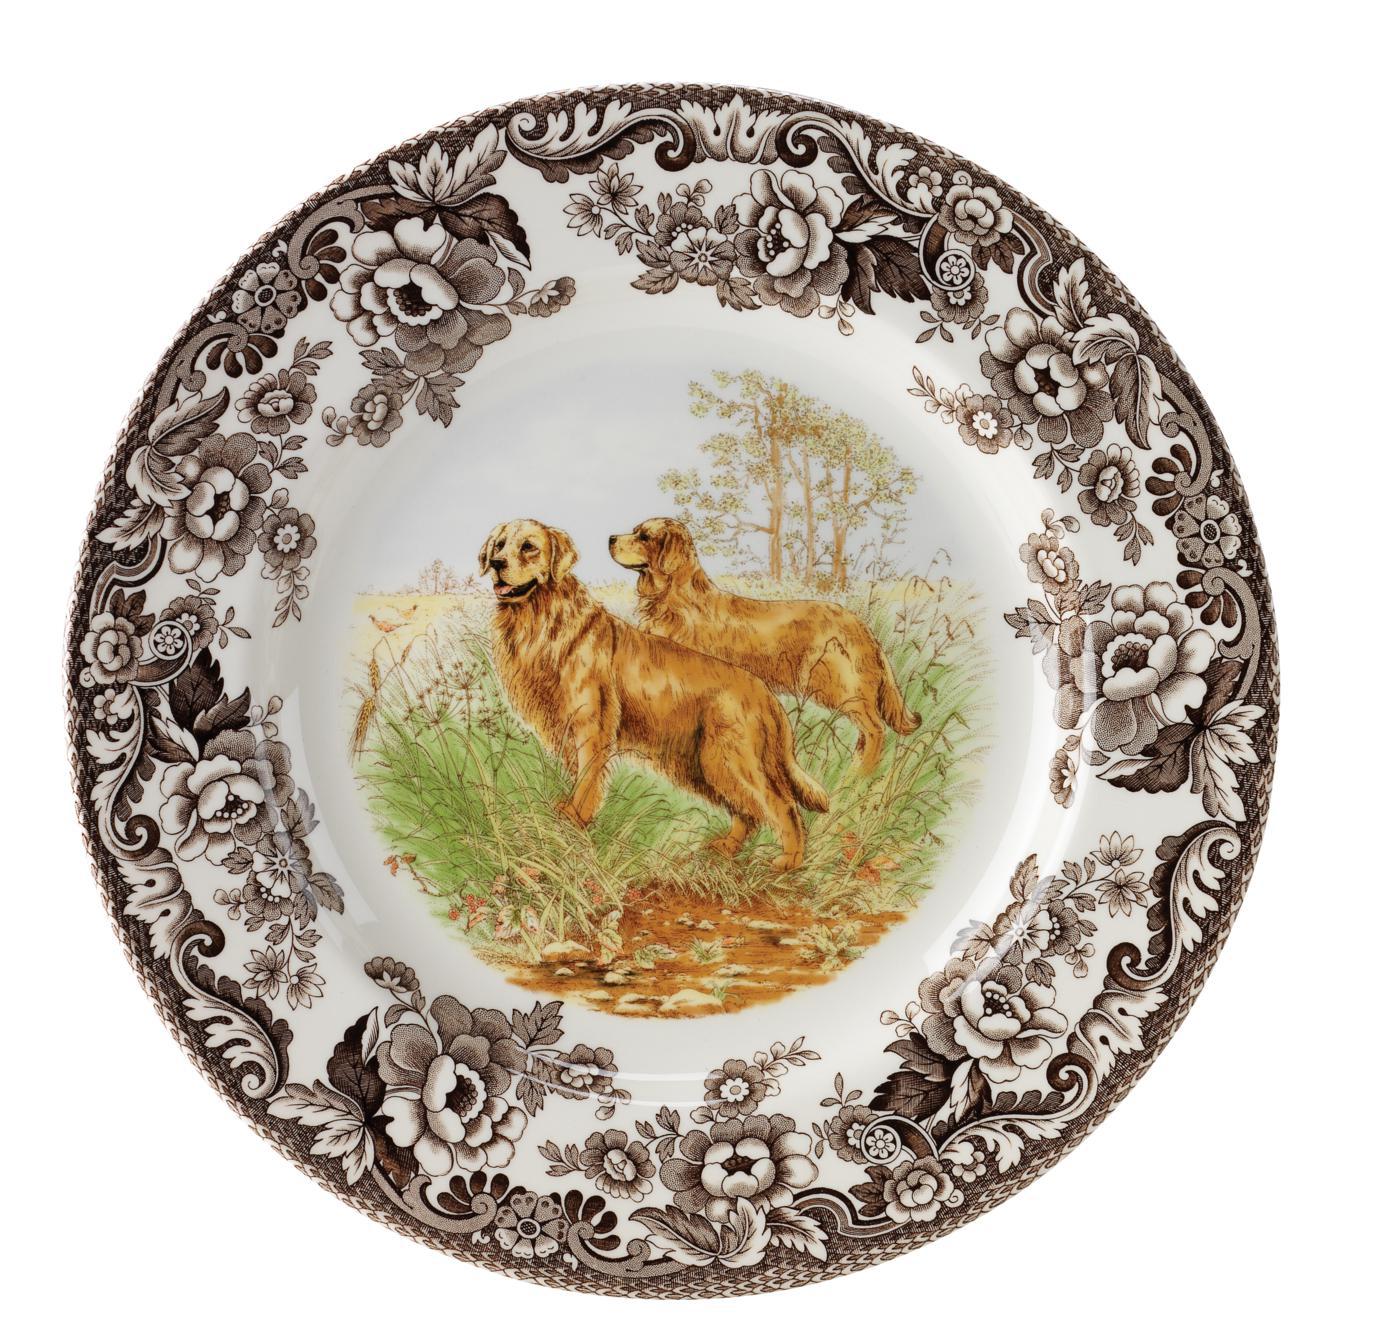 Woodland Dinner Plate 10.5 Inch, Golden Retriever image number null